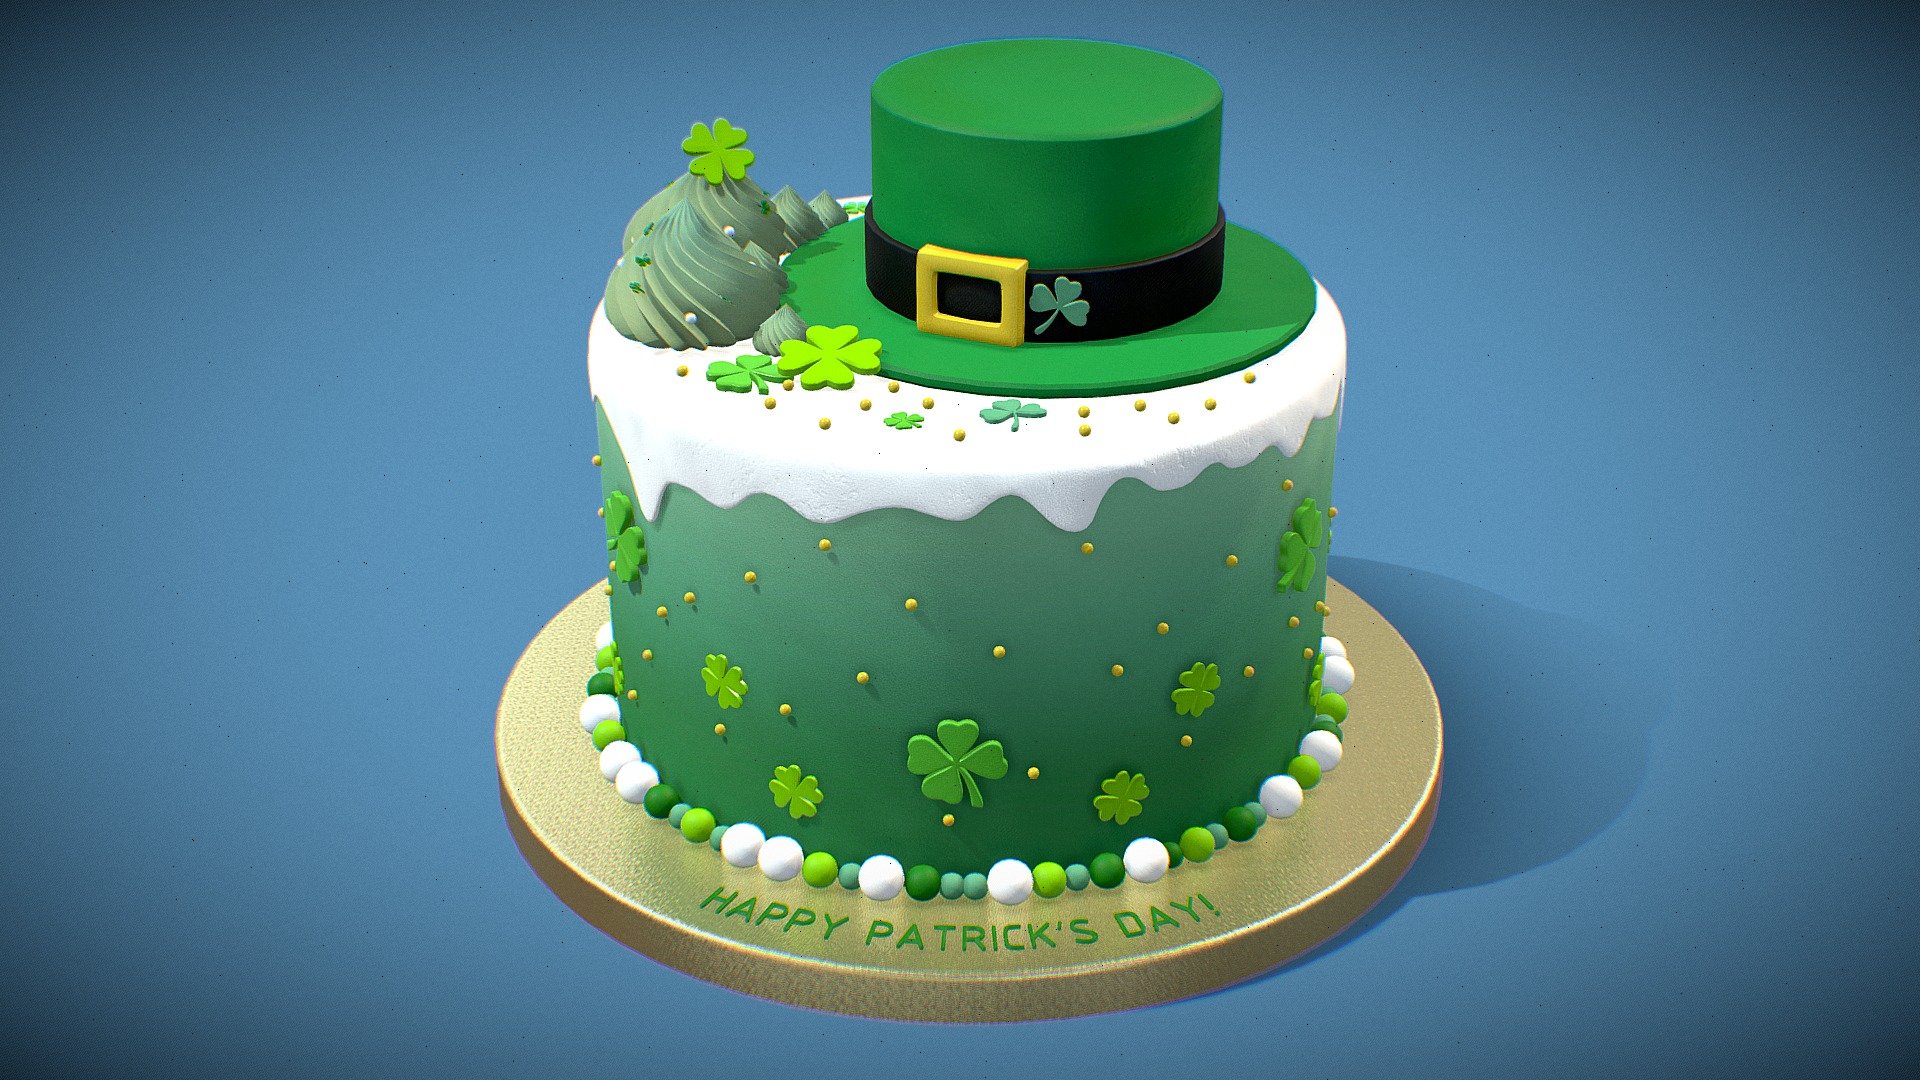 Presenting St. Patrick's Day-inspired 3D cake. The cake's rich layers, adorned with vibrant shades of green, mirror the lush landscapes of Ireland. Atop this delectable creation sits a meticulously crafted leprechaun hat, adding a playful touch to the celebration 3d model